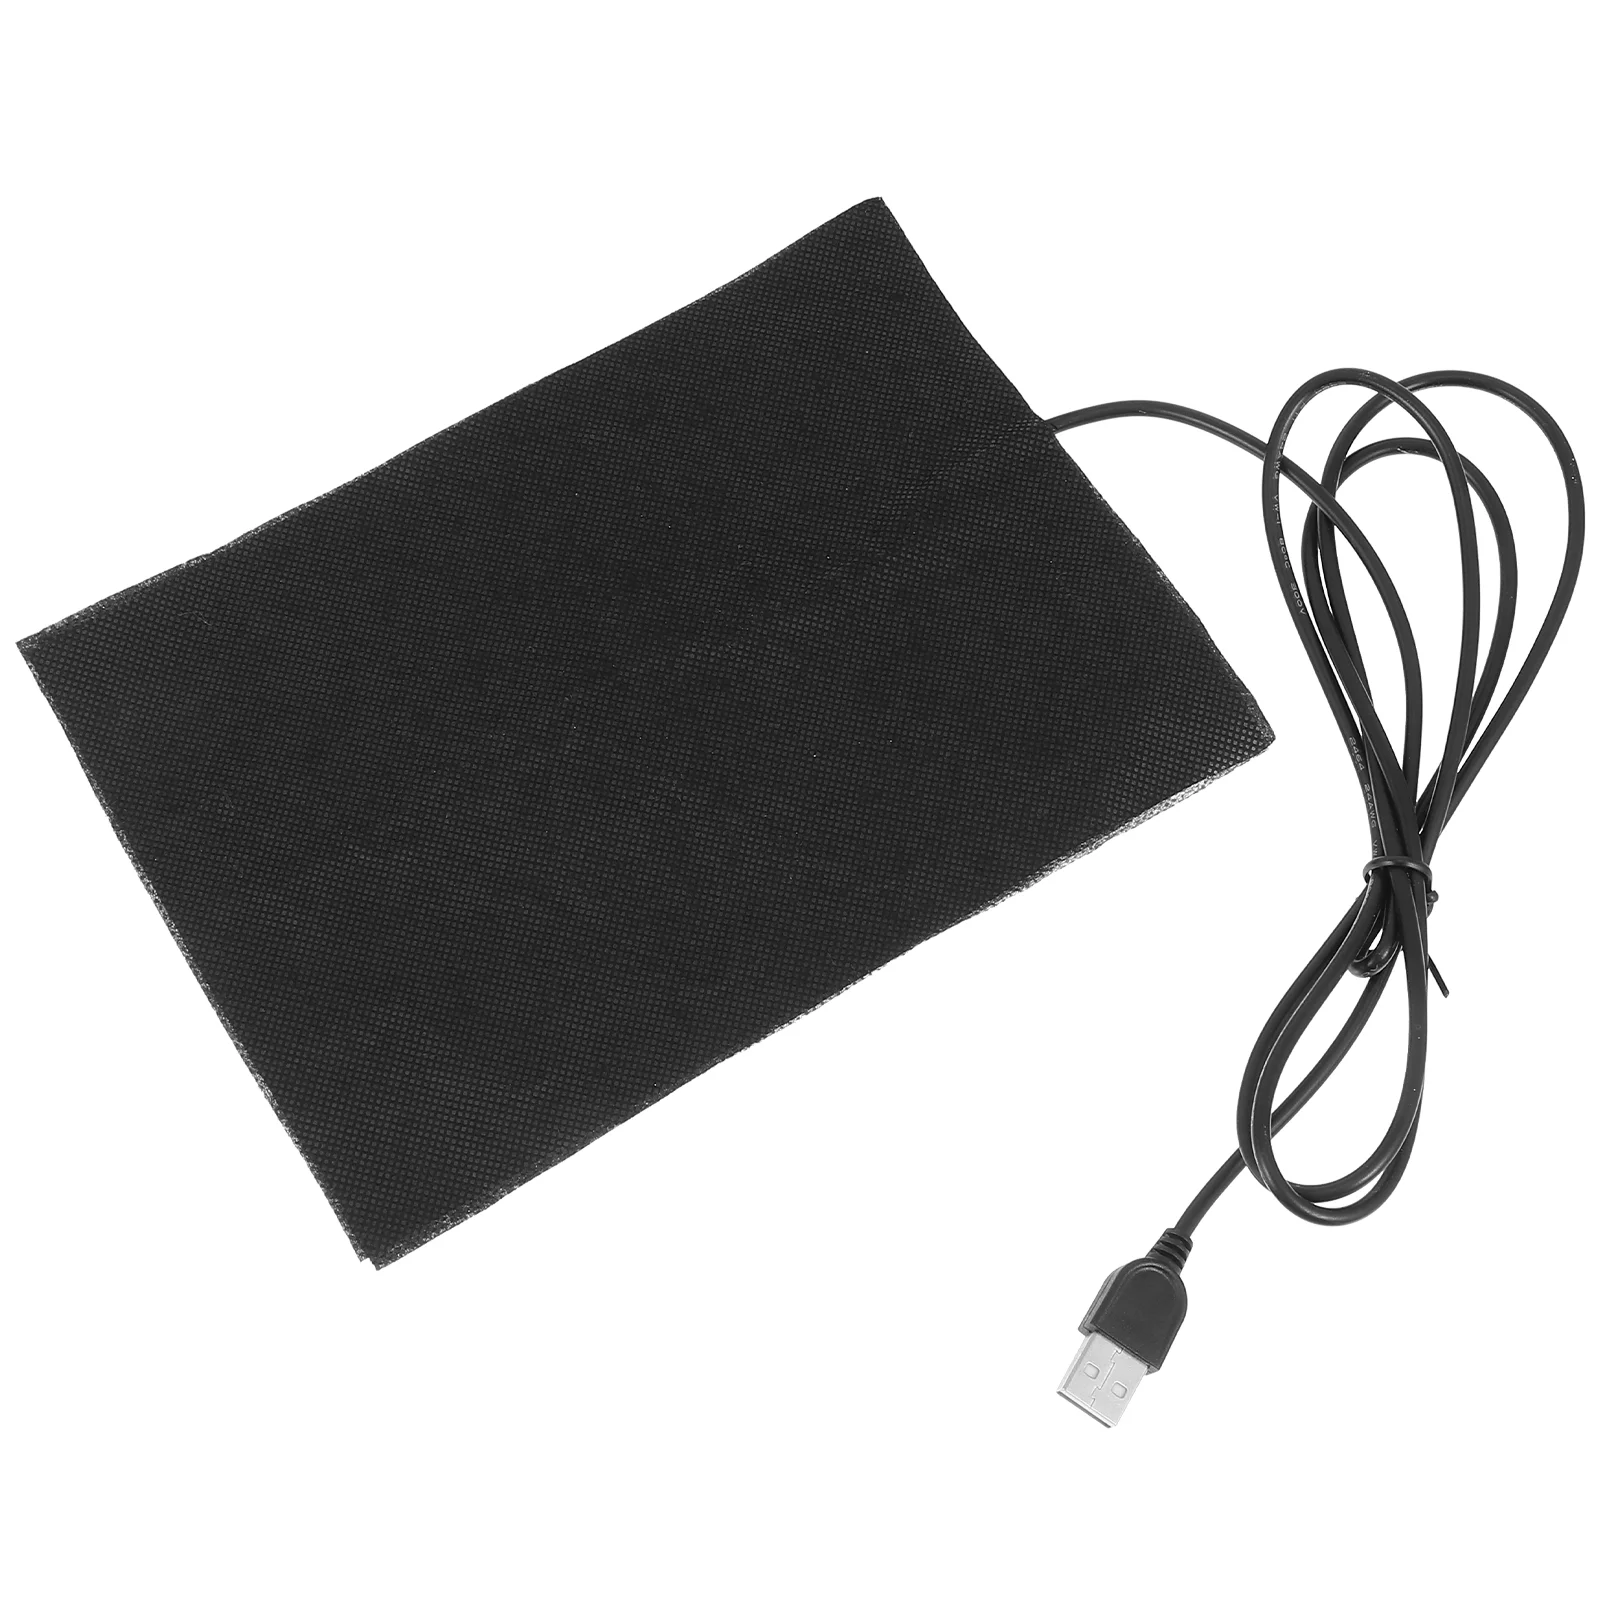 

Epoxy Mat Pad Heating Resin Heater Usb Curing Bubble Buster Cotton Silicone Warmer Dryer Heat Reducer Thermal Insulation